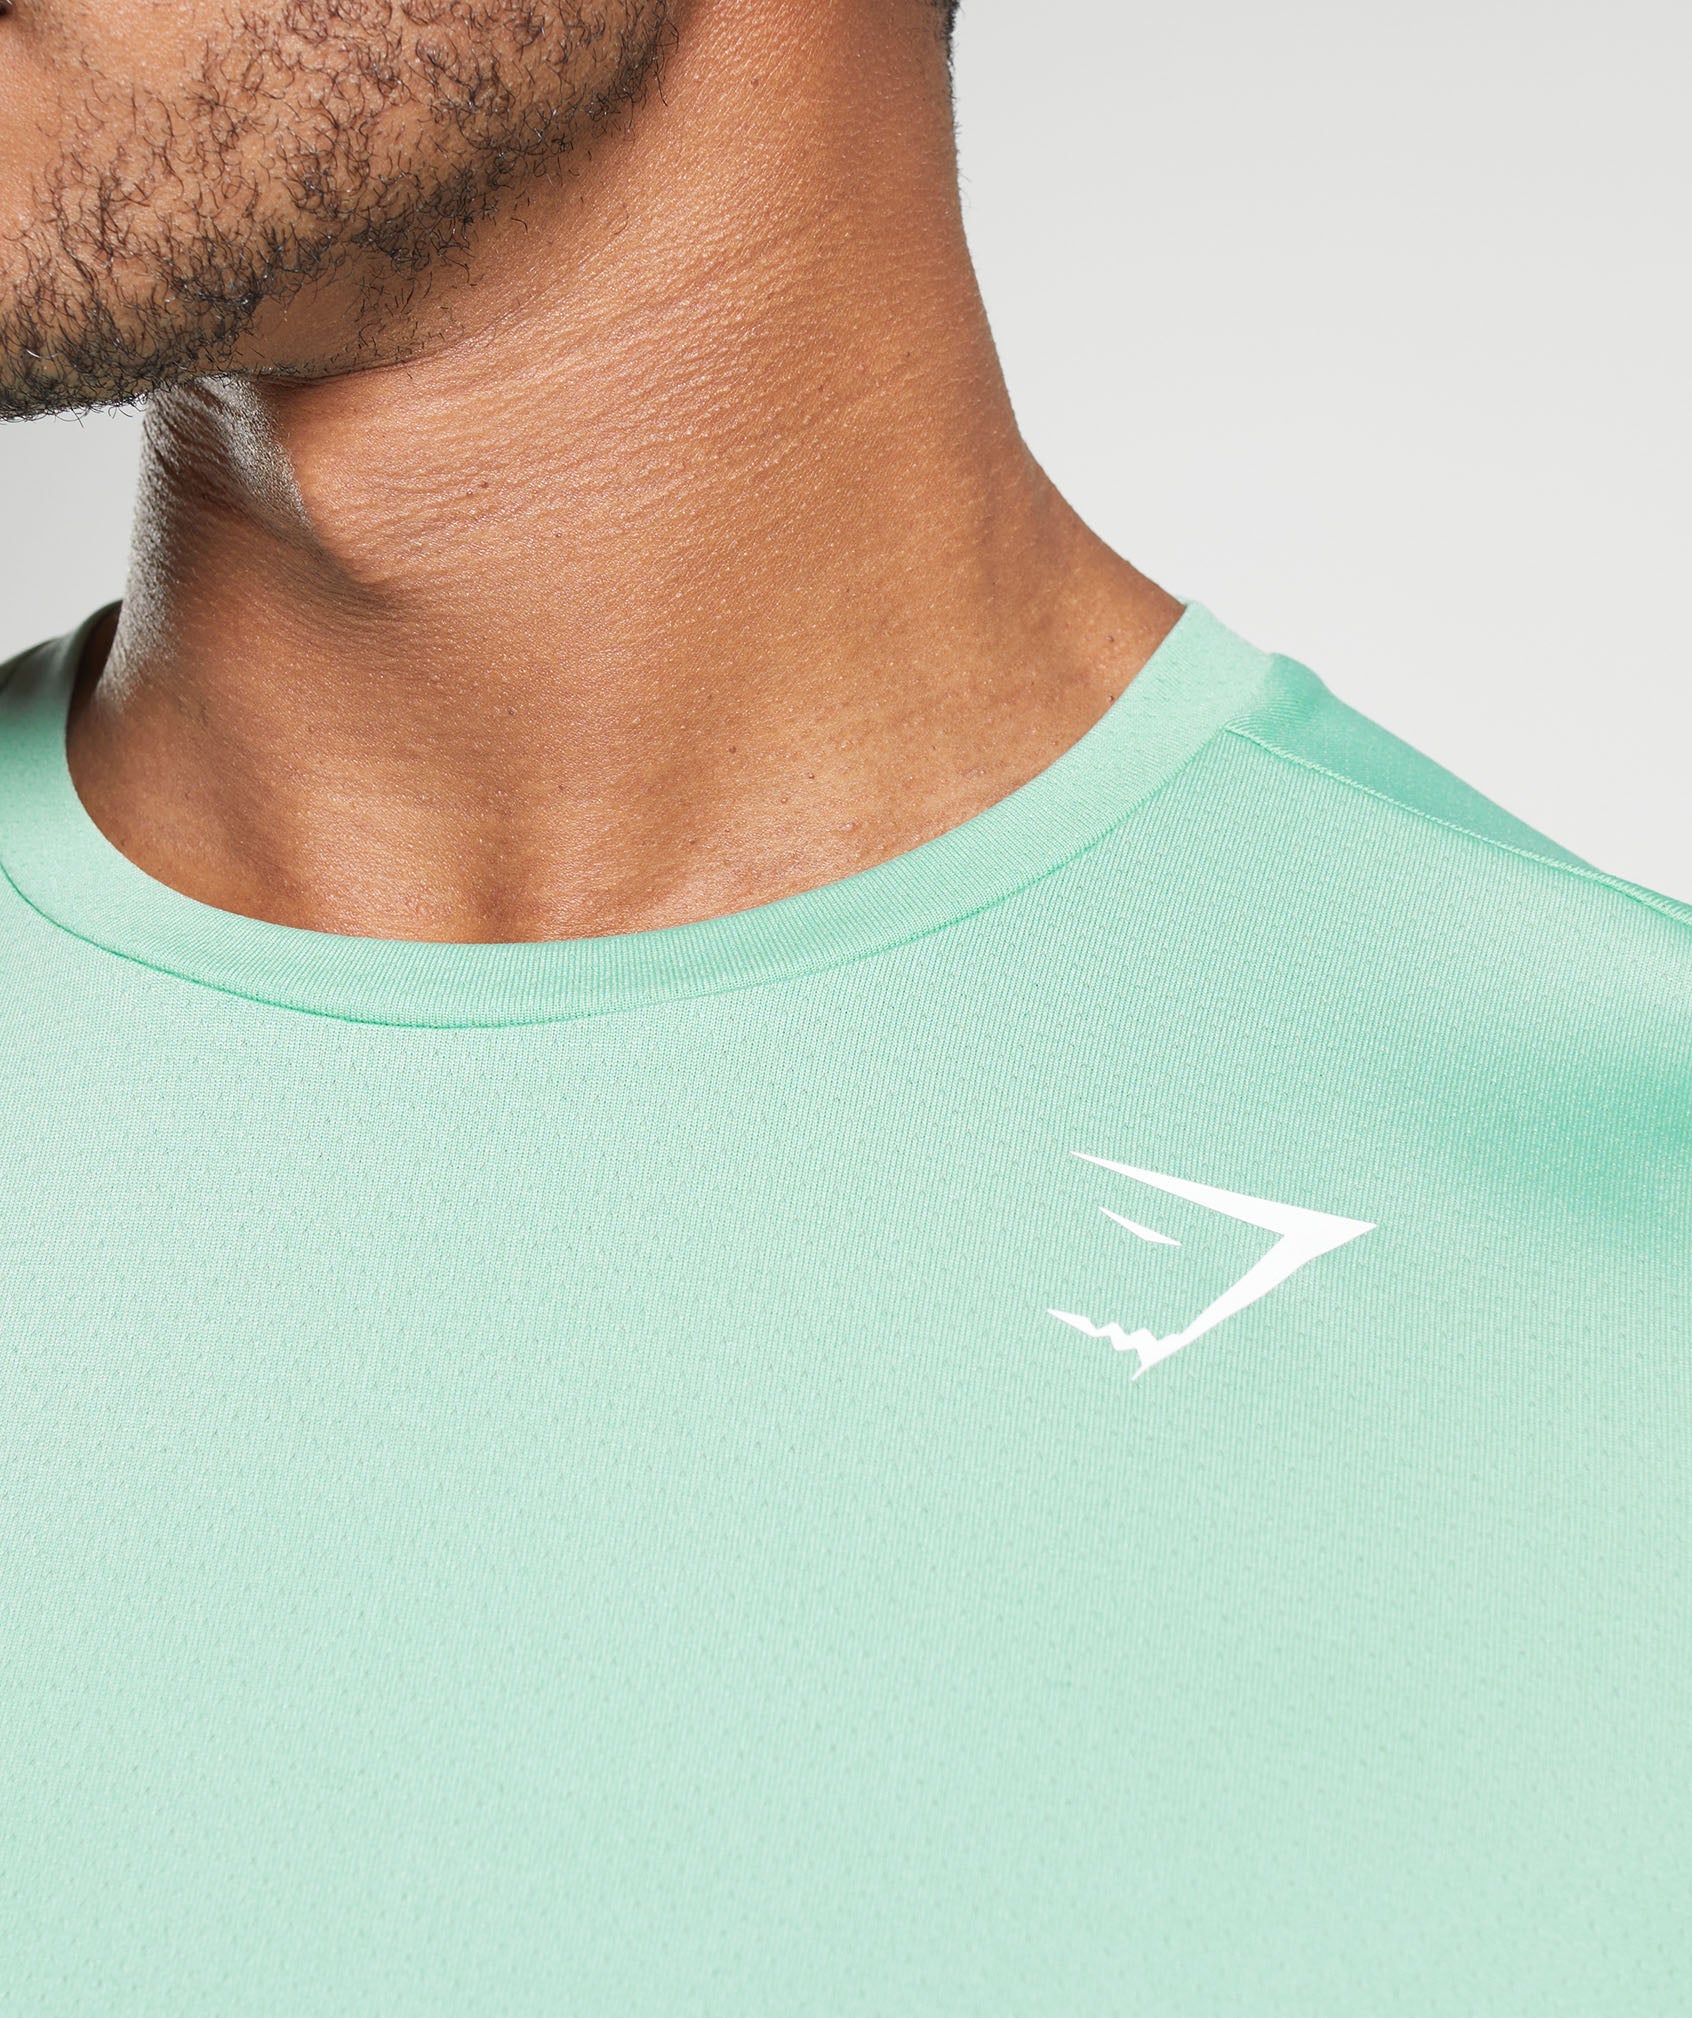 Arrival T-Shirt in Lido Green - view 5